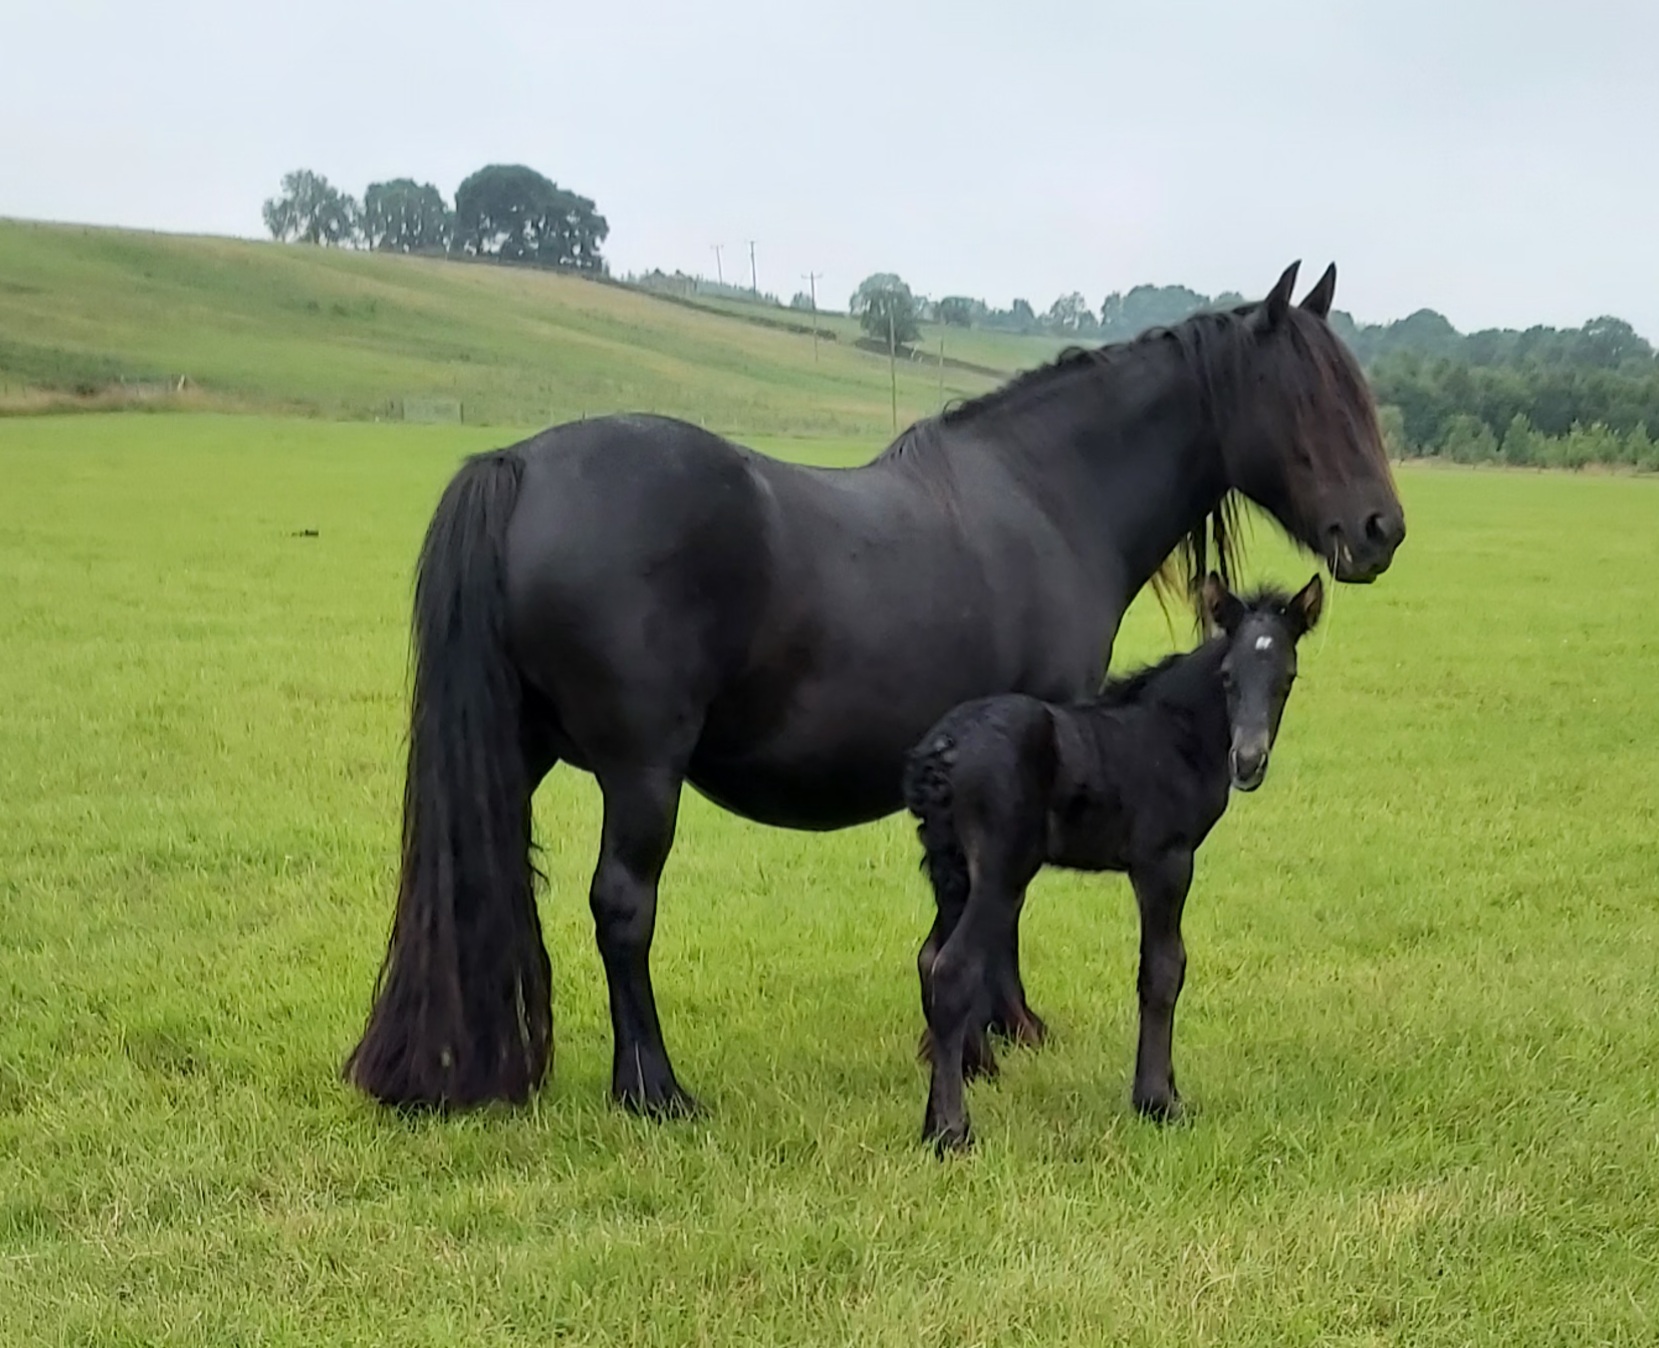 Black mare and foal in a green field